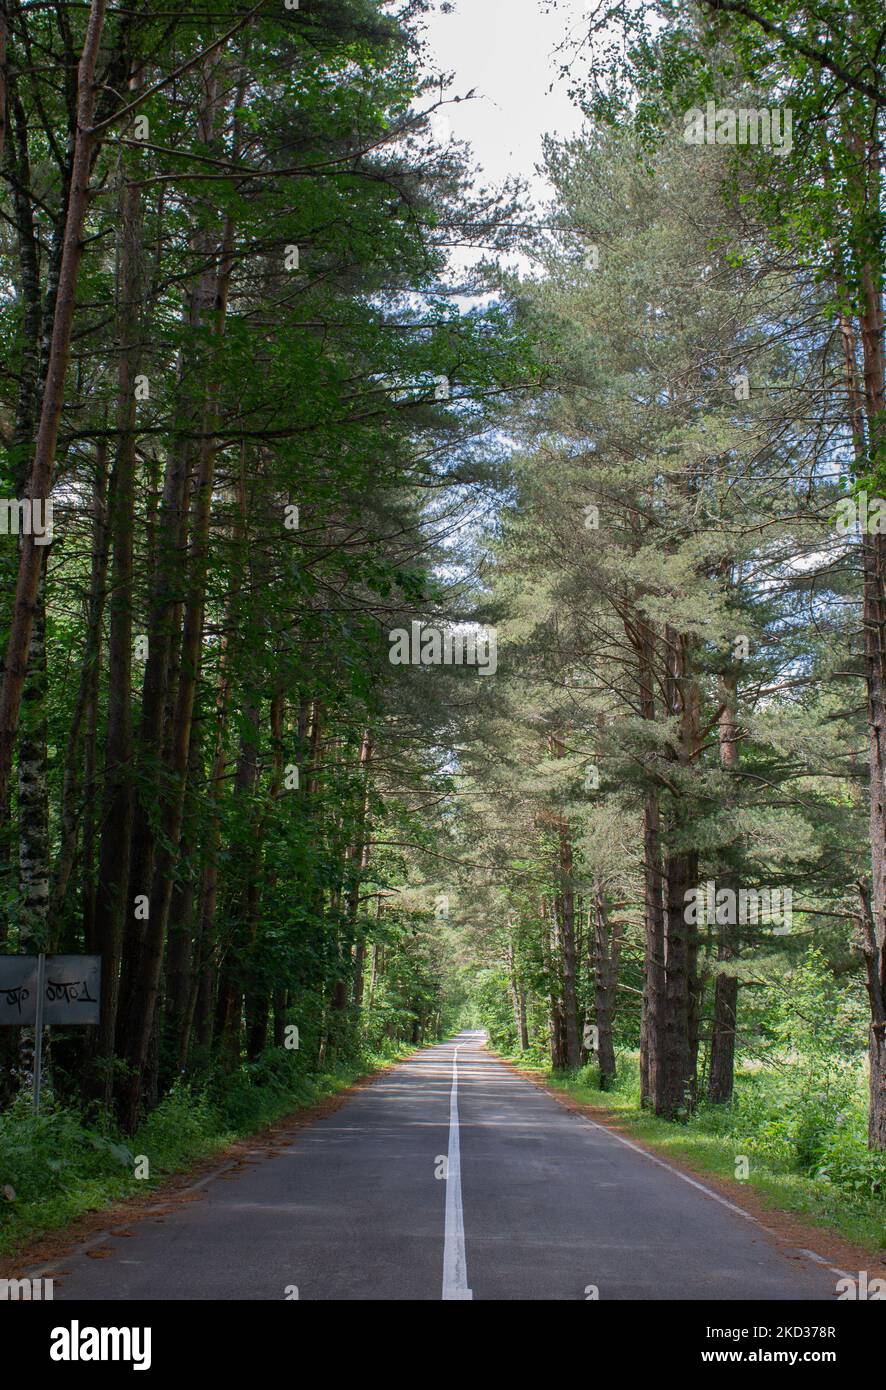 A vertical shot of a straight road lined with trees in Dombay, Karachay-Cherkess Republic, Russia Stock Photo